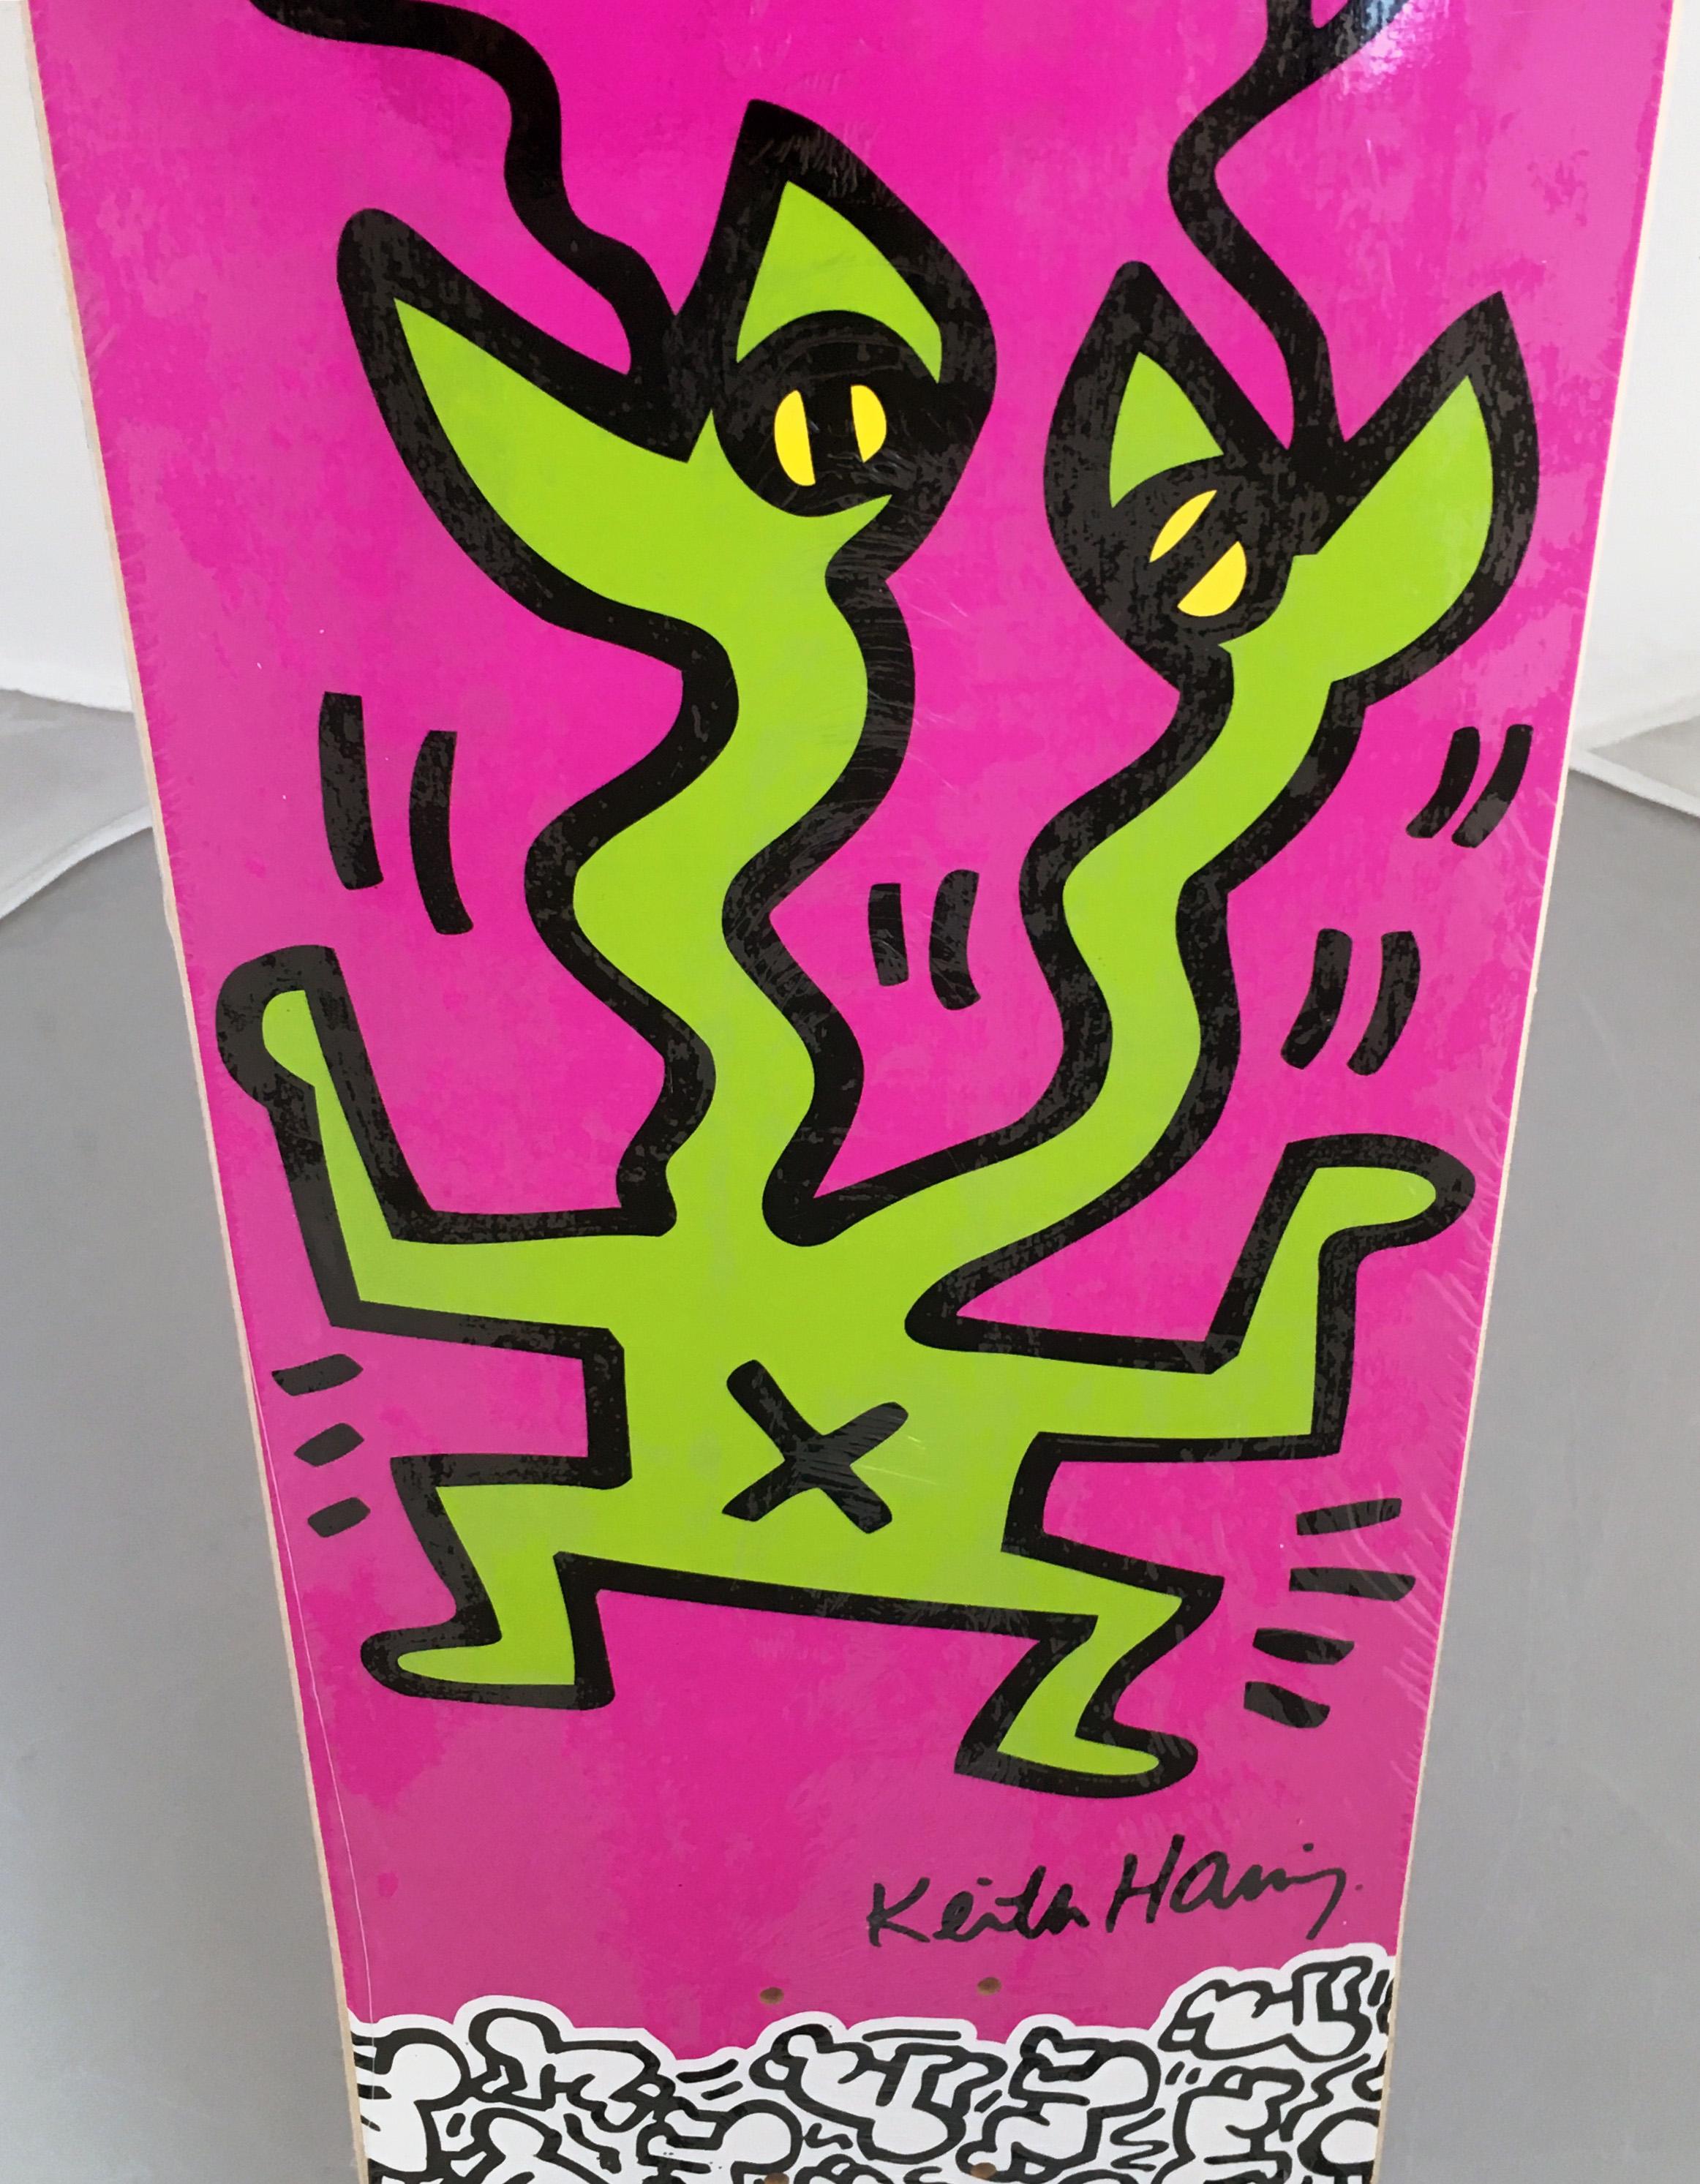 Keith Haring Skateboard Deck (Purple) - Pop Art Print by (after) Keith Haring